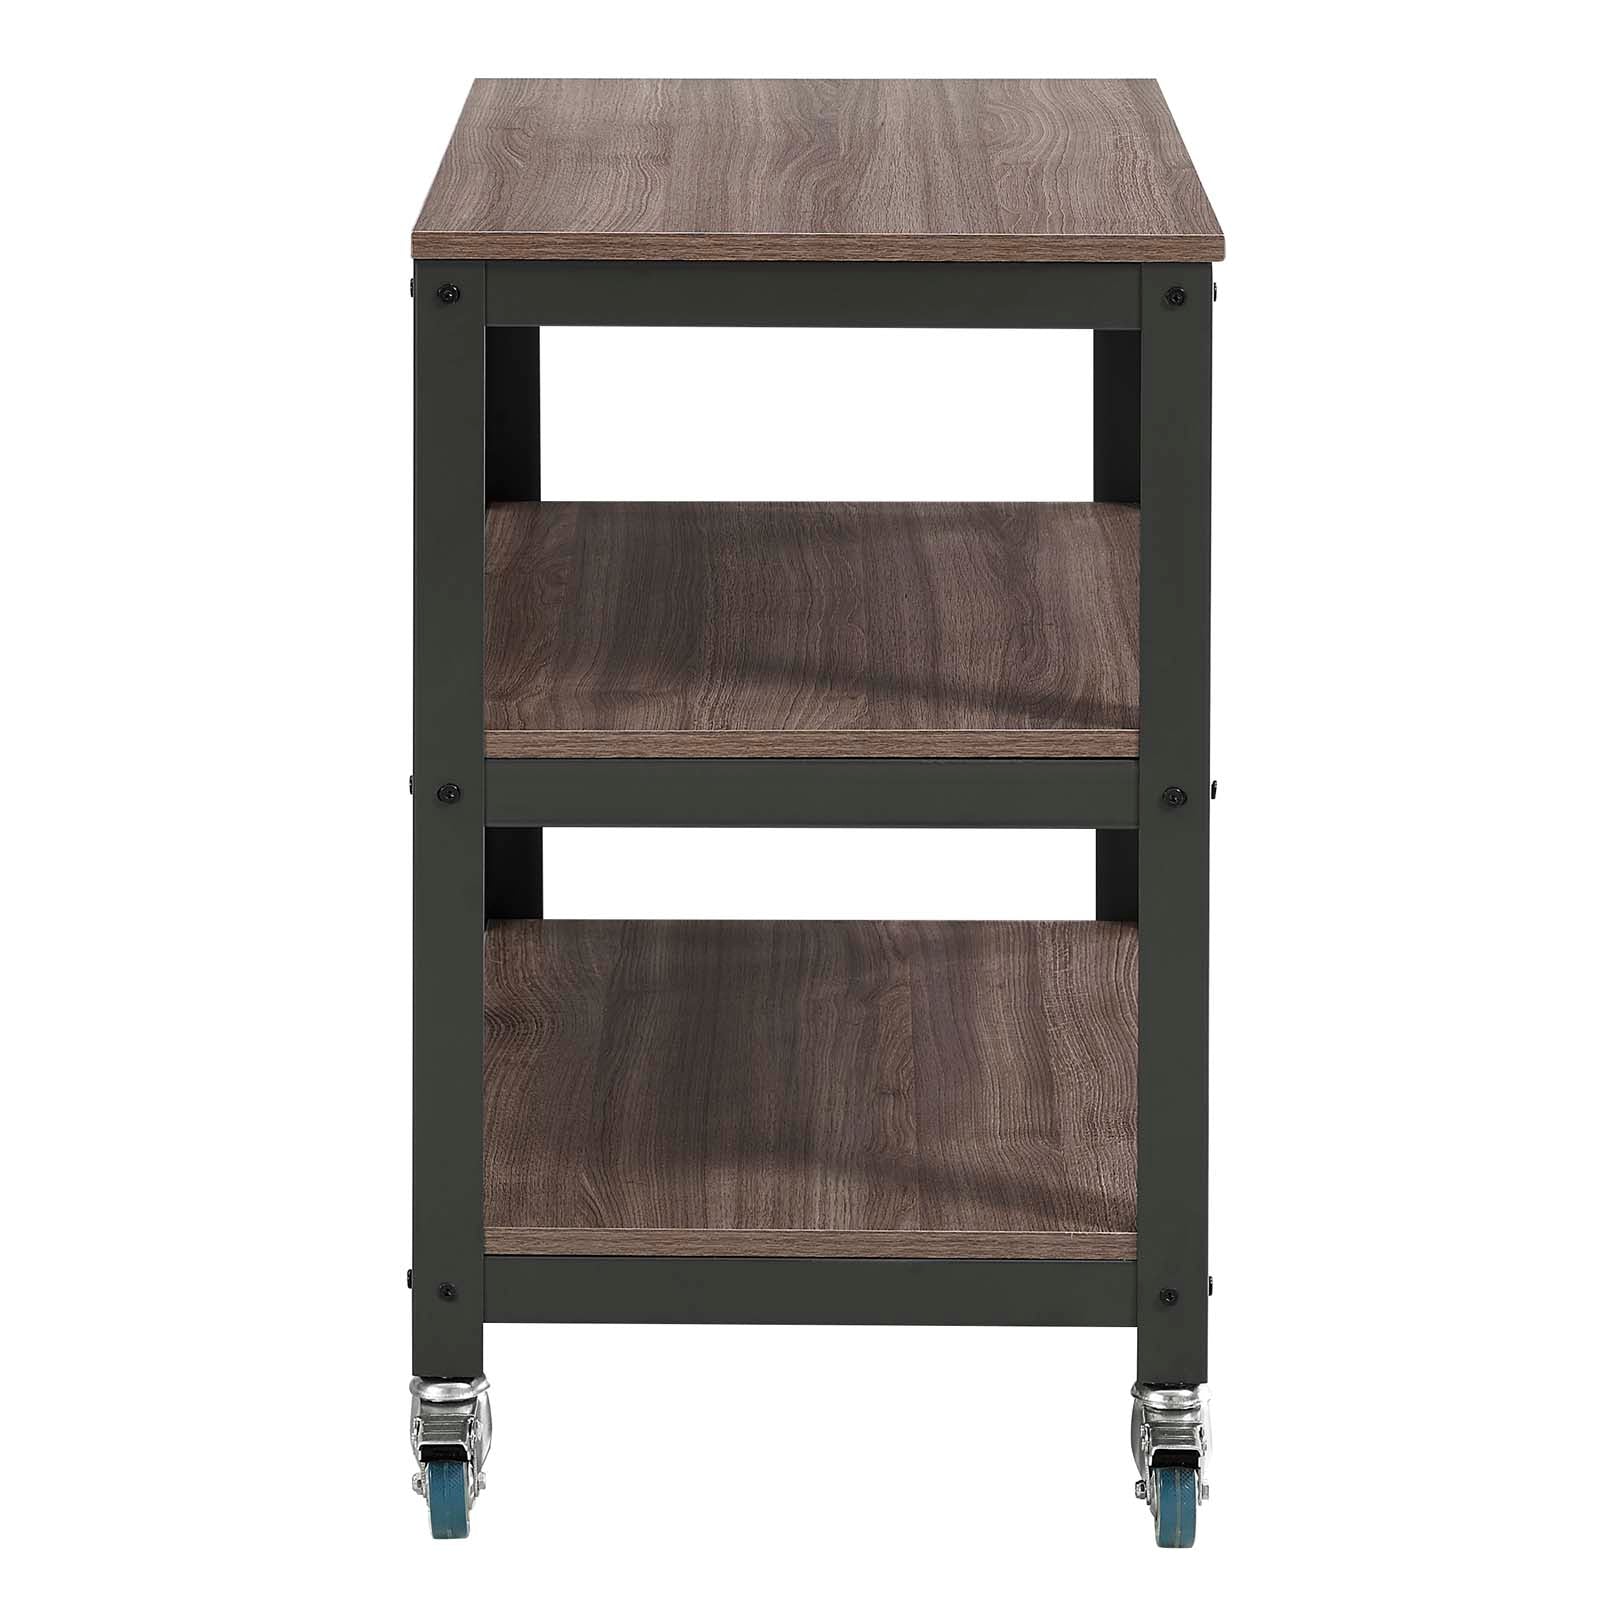 Vivify Tiered Serving Stand - East Shore Modern Home Furnishings